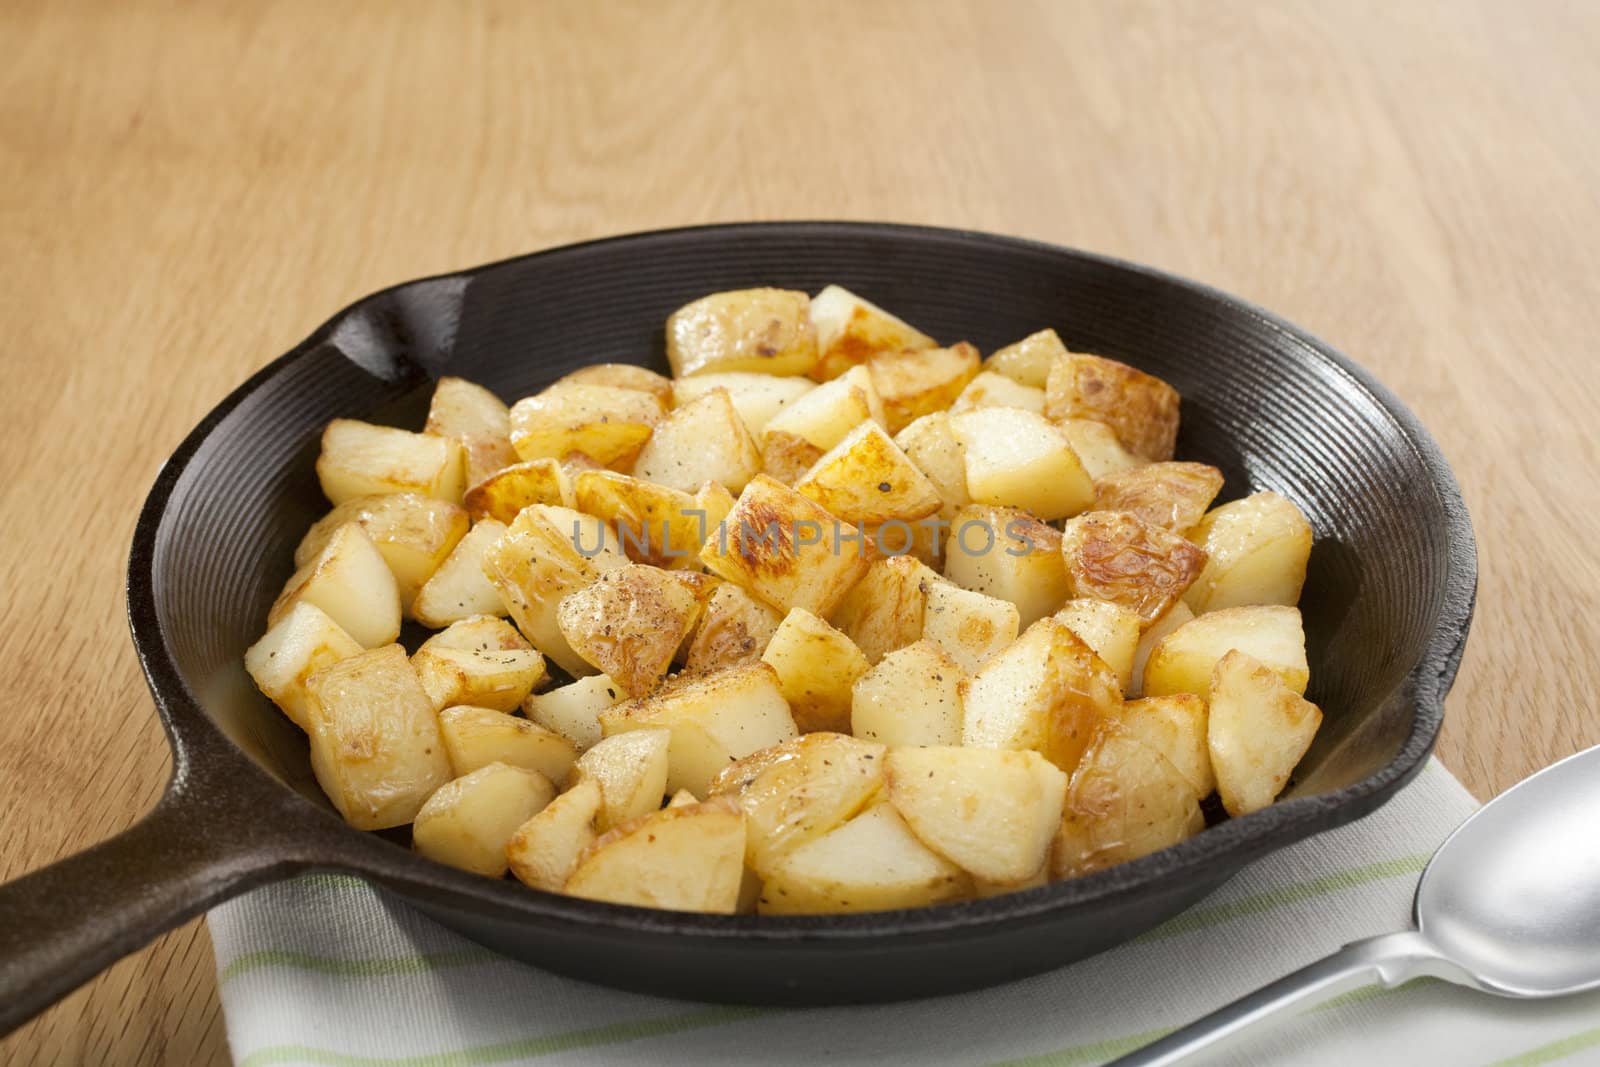 Home Fries or Saute Potatoes in a Skillet by Travelling-light